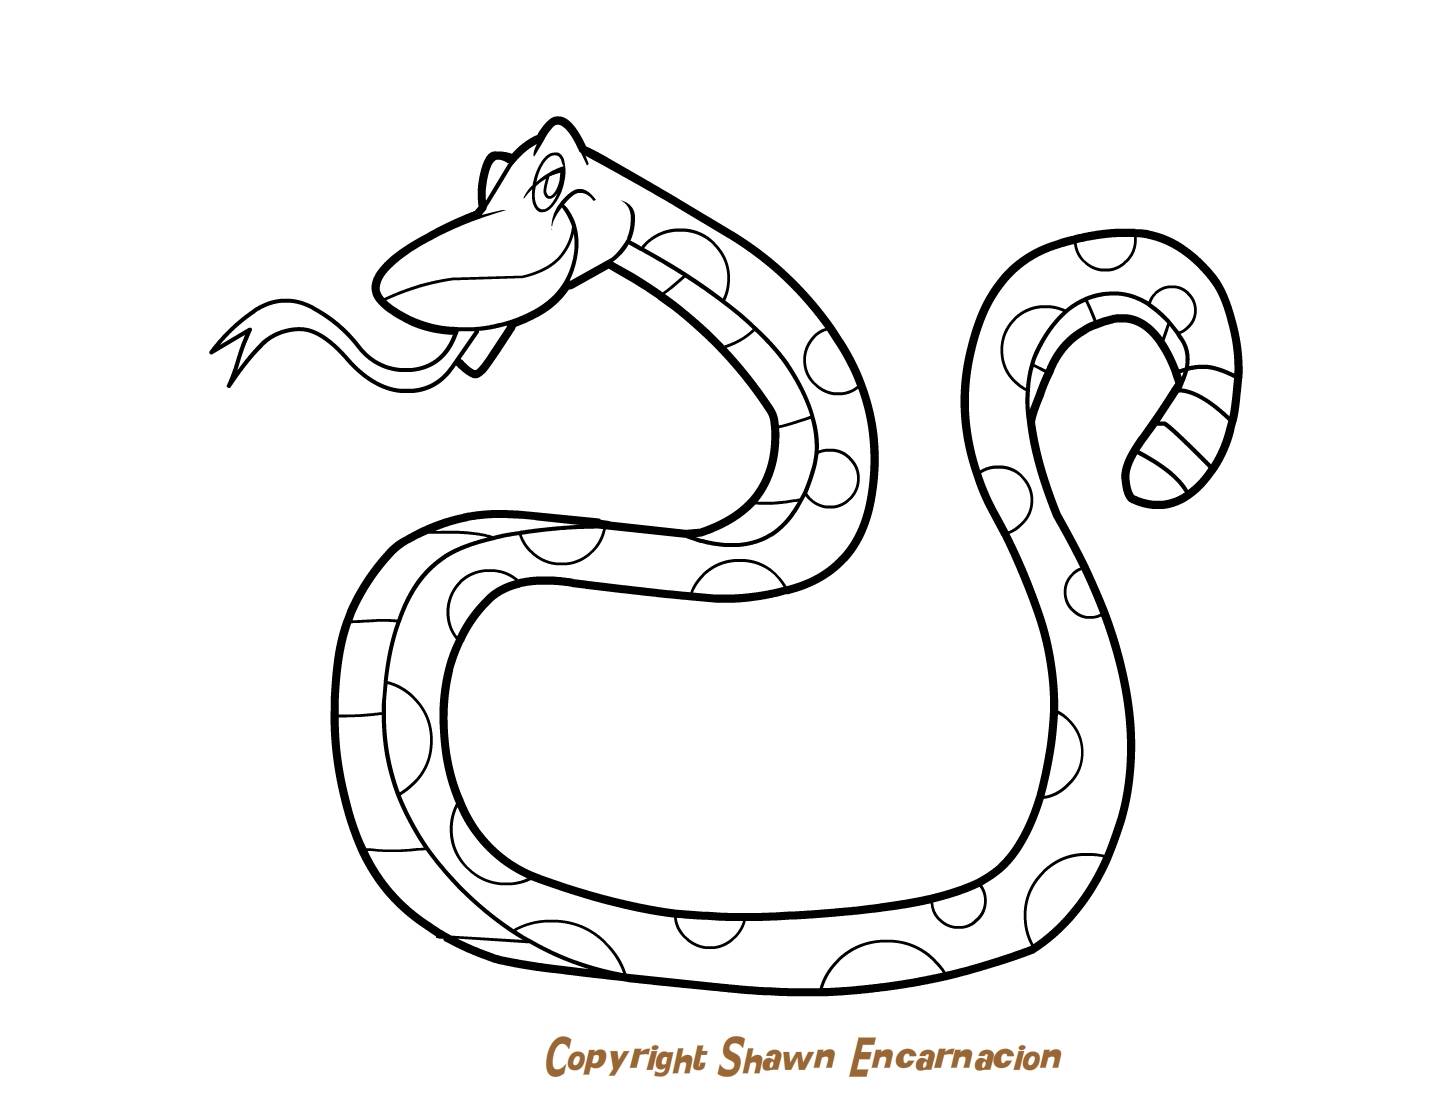 Snake Drawing 17172 Hd Wallpapers in Animals - Imagesci.com